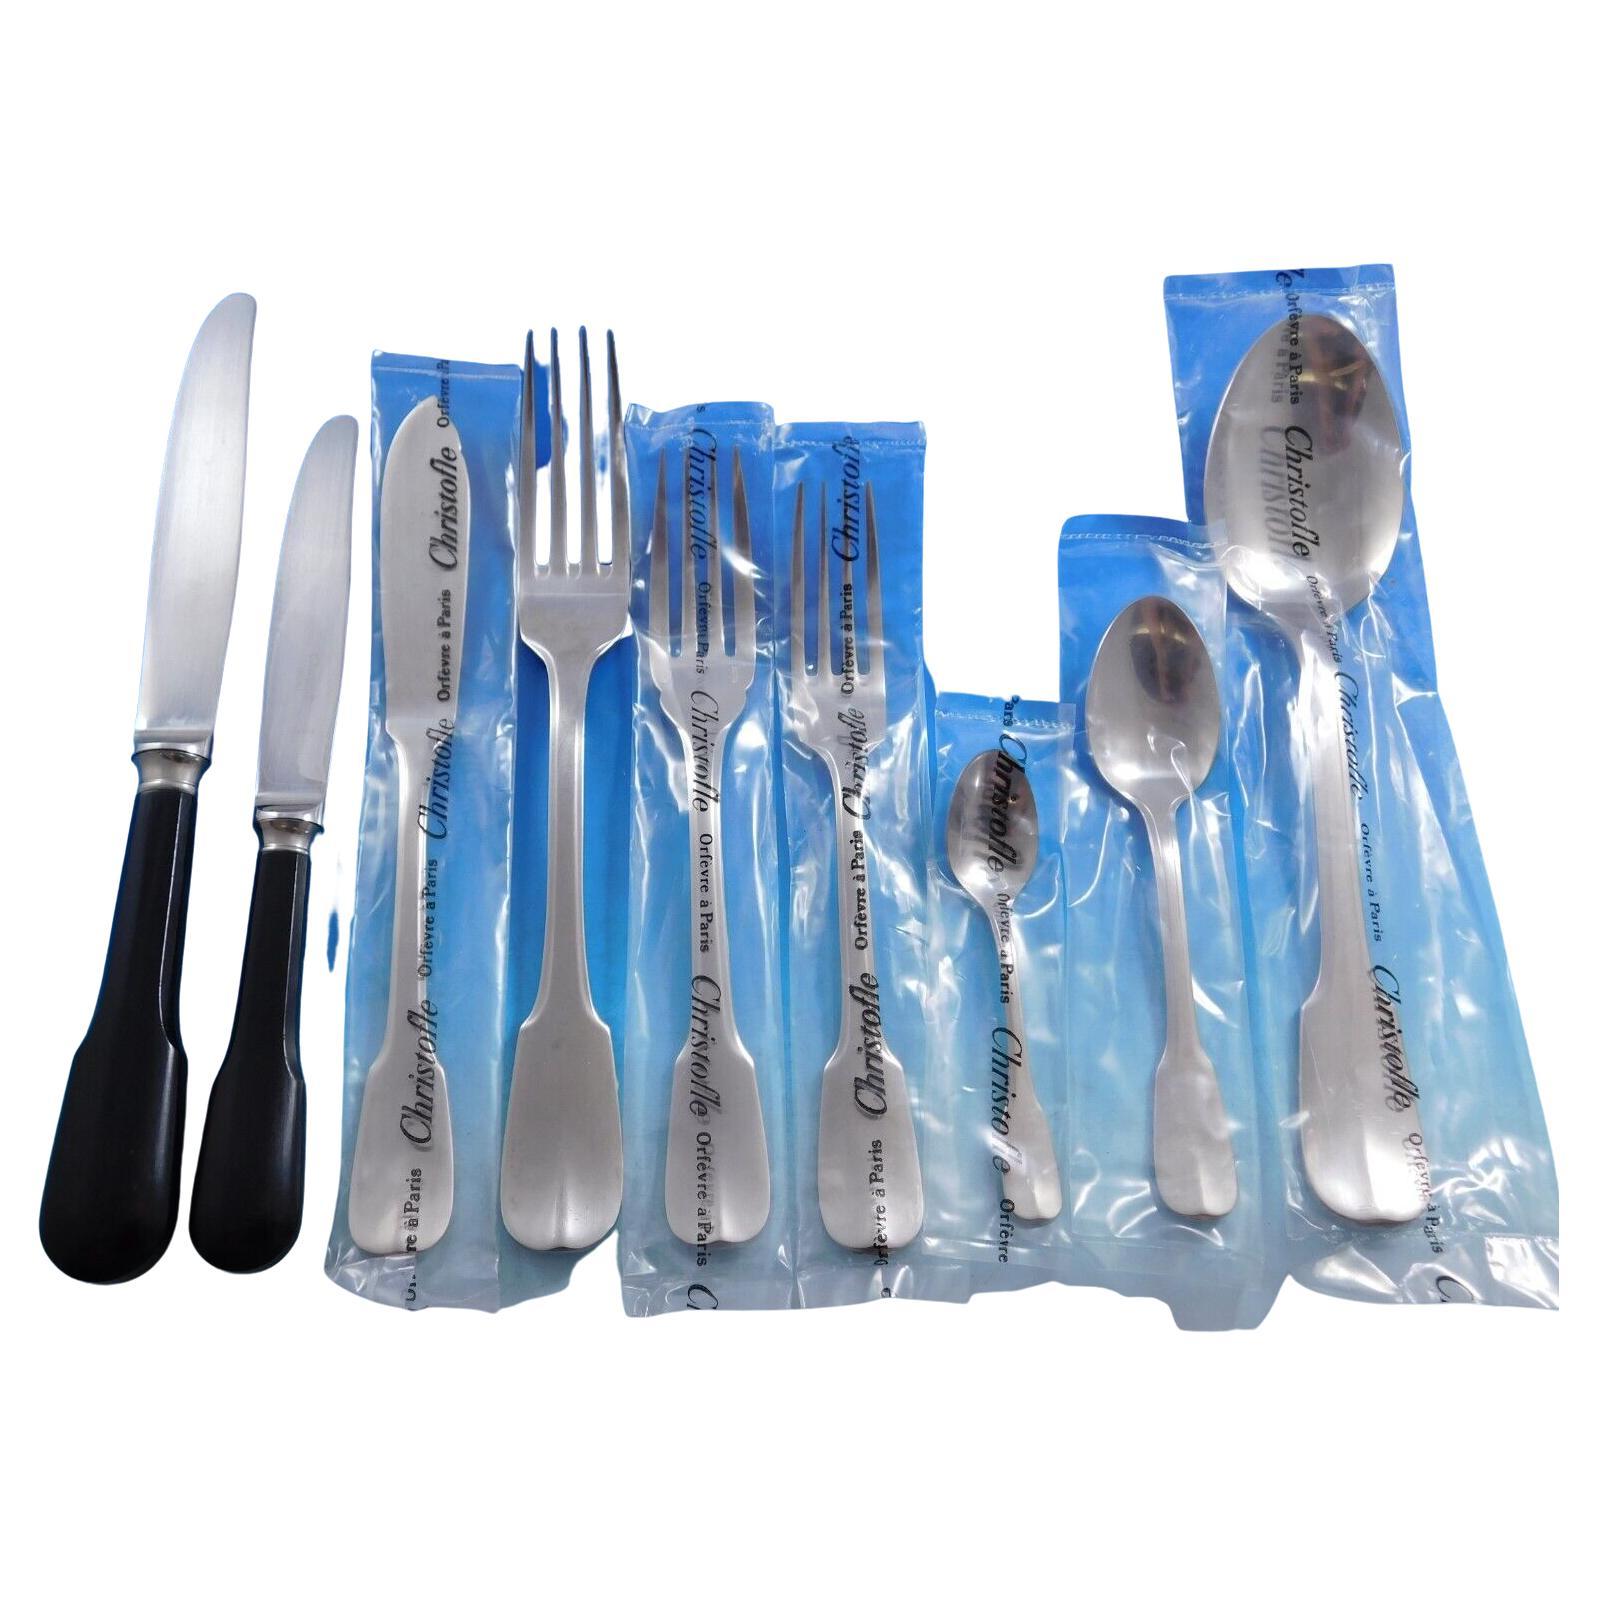 Bearn by Christofle France Stainless Steel Flatware Service Set 110 pcs Dinner